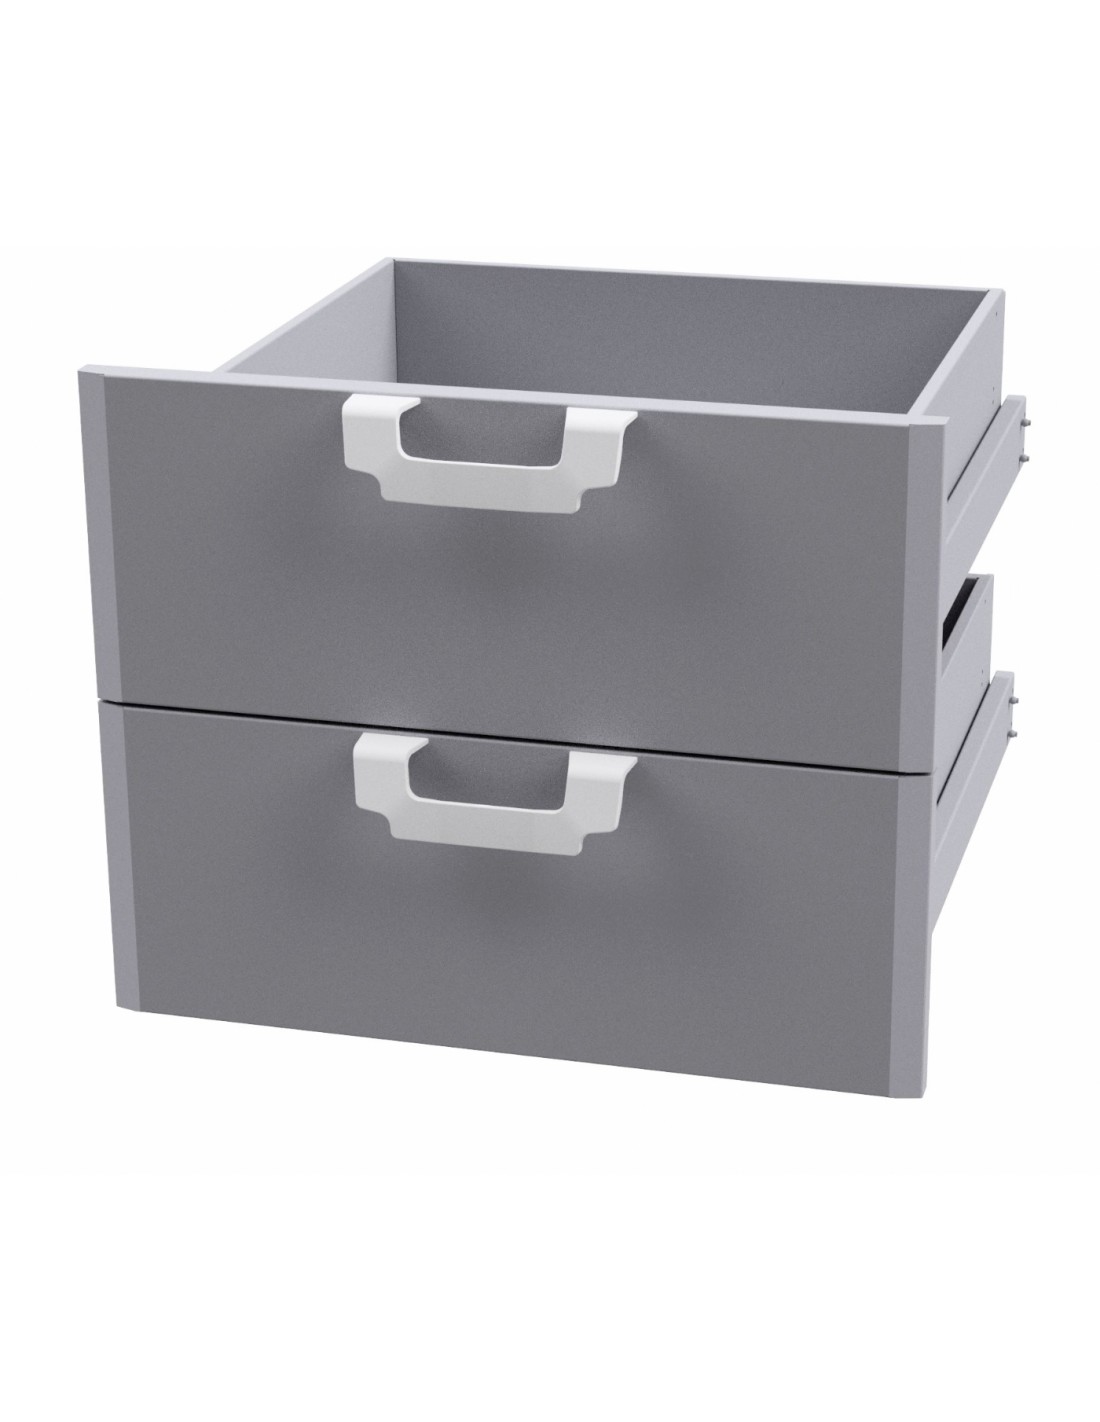 Chest of drawers 300/400/600 - N. 2 drawers with stainless steel tub Telescopic guides - Dimensions cm. 59.5x 51x 47.5h